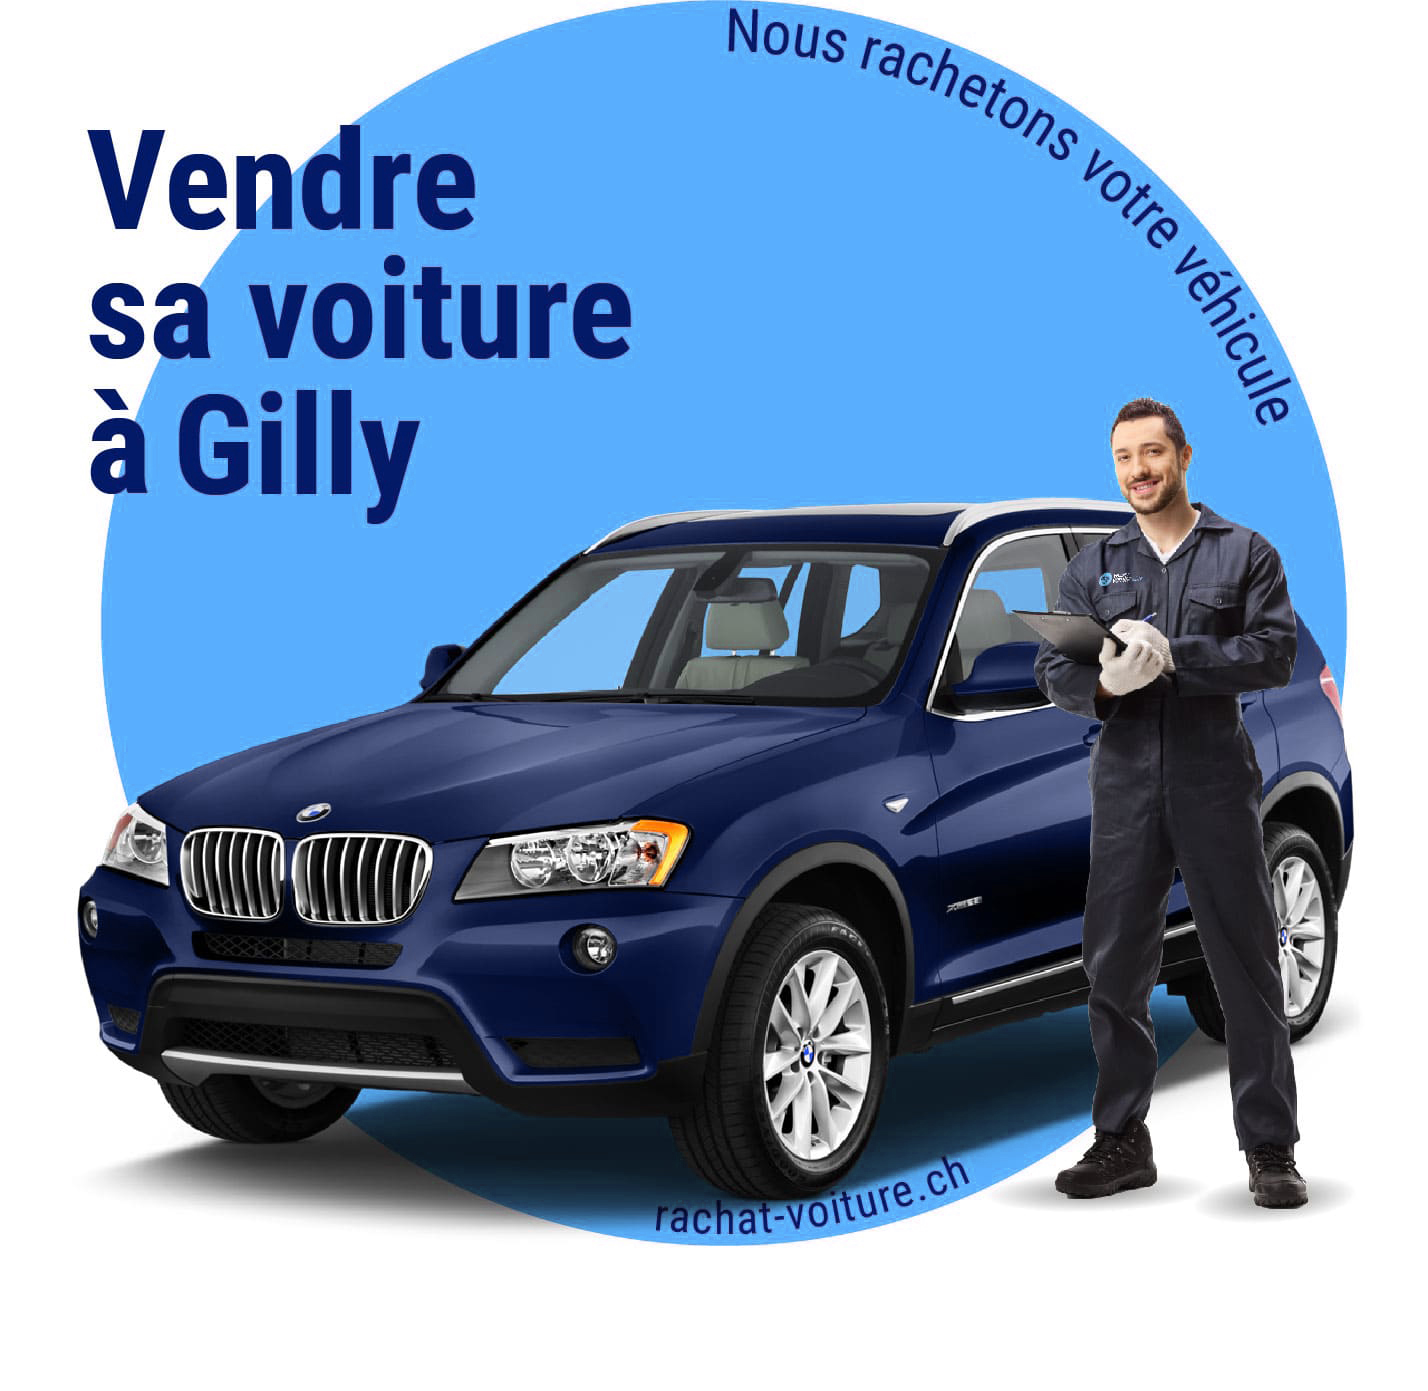 Vendre sa voiture à Gilly